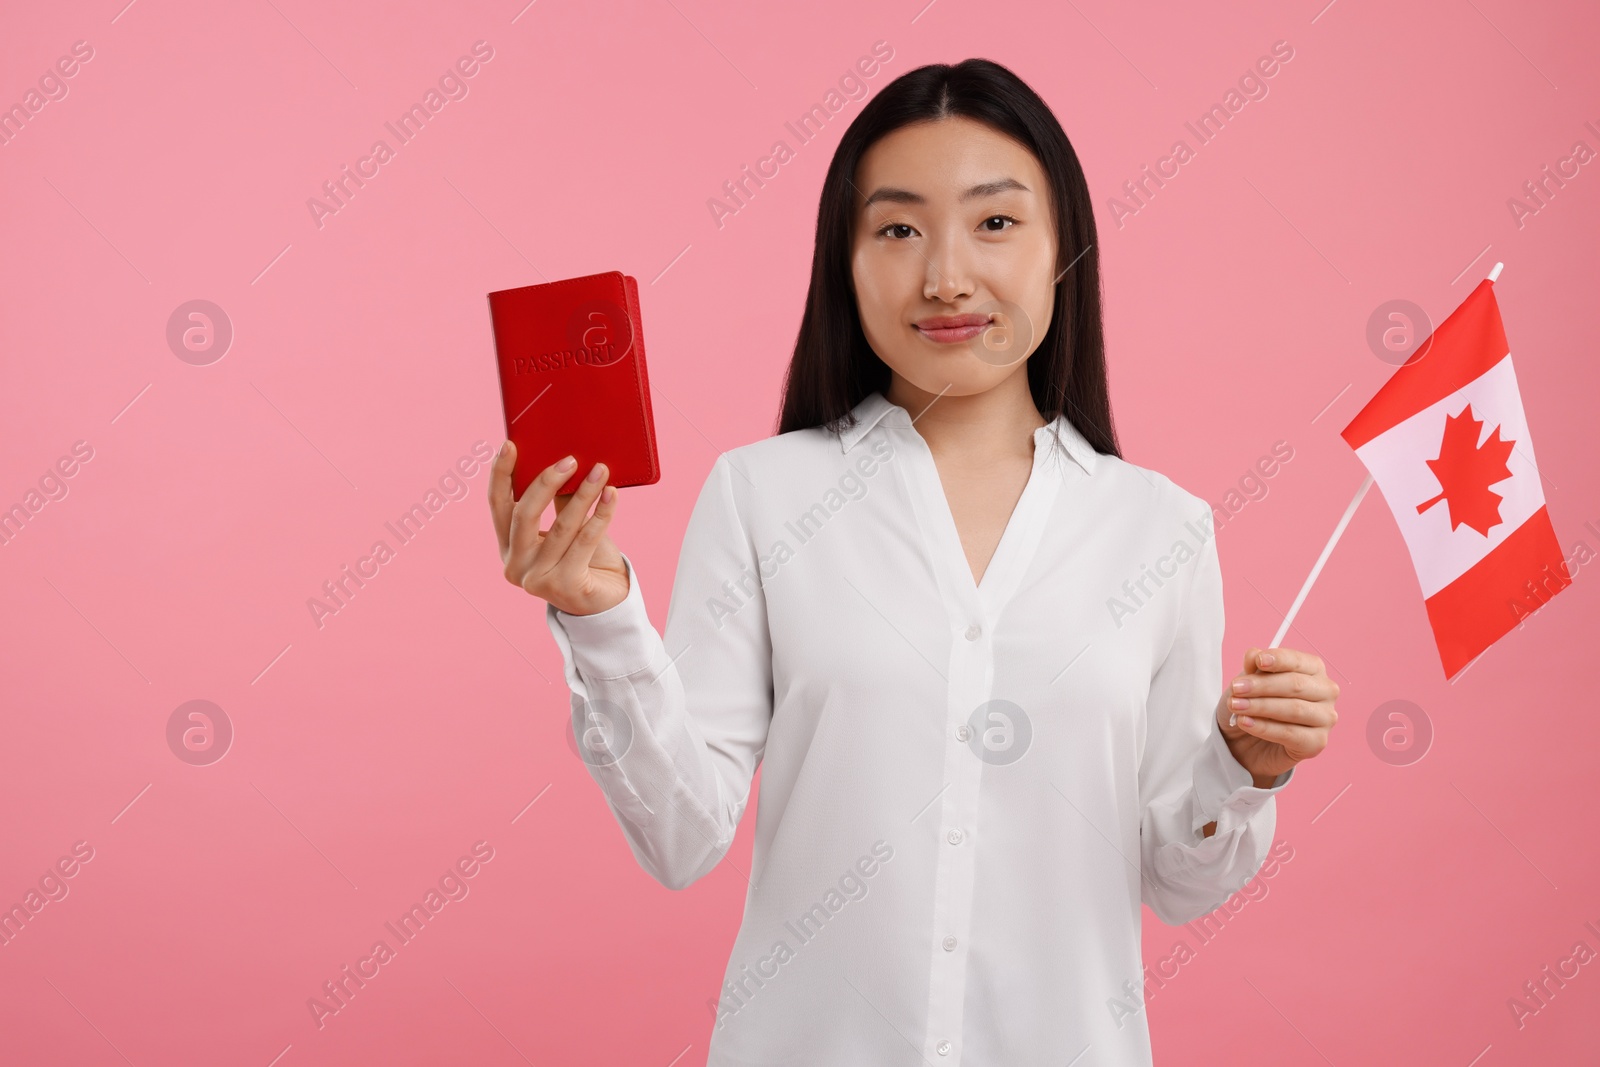 Photo of Immigration to Canada. Woman with passport and flag on pink background, space for text